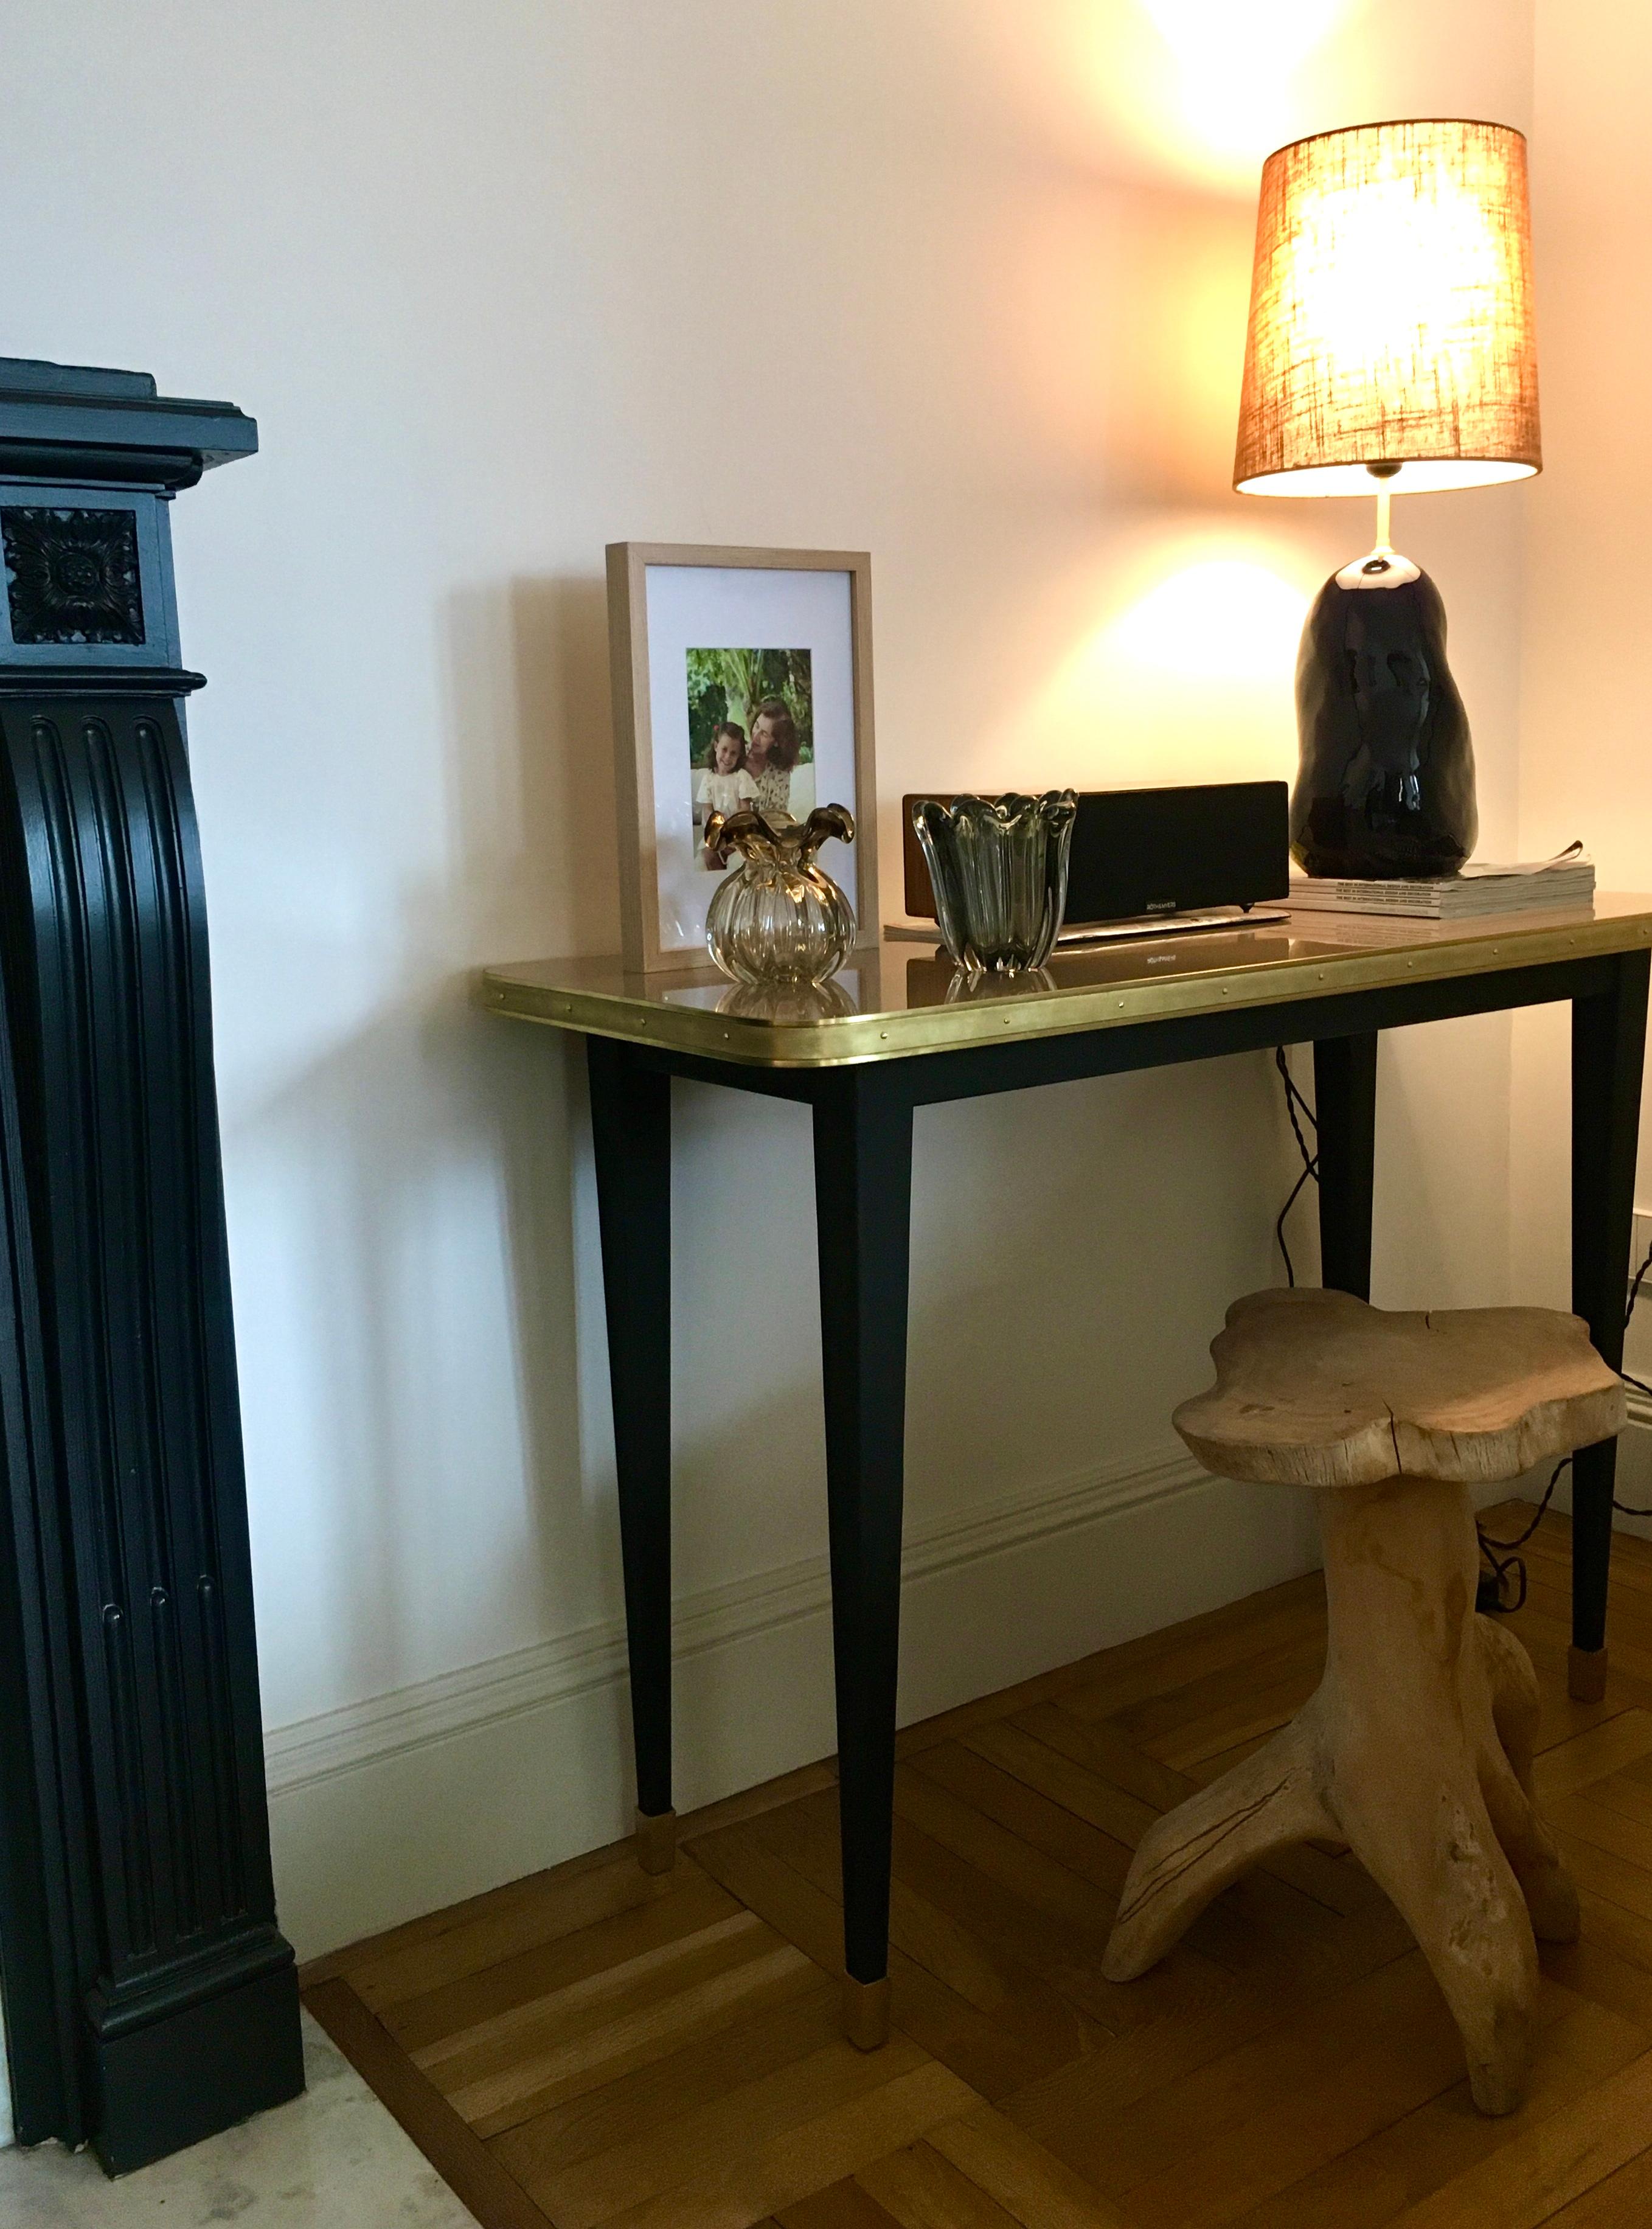 Spanish Console Table, High Gloss Laminate & Brass Details, Antique White - L For Sale